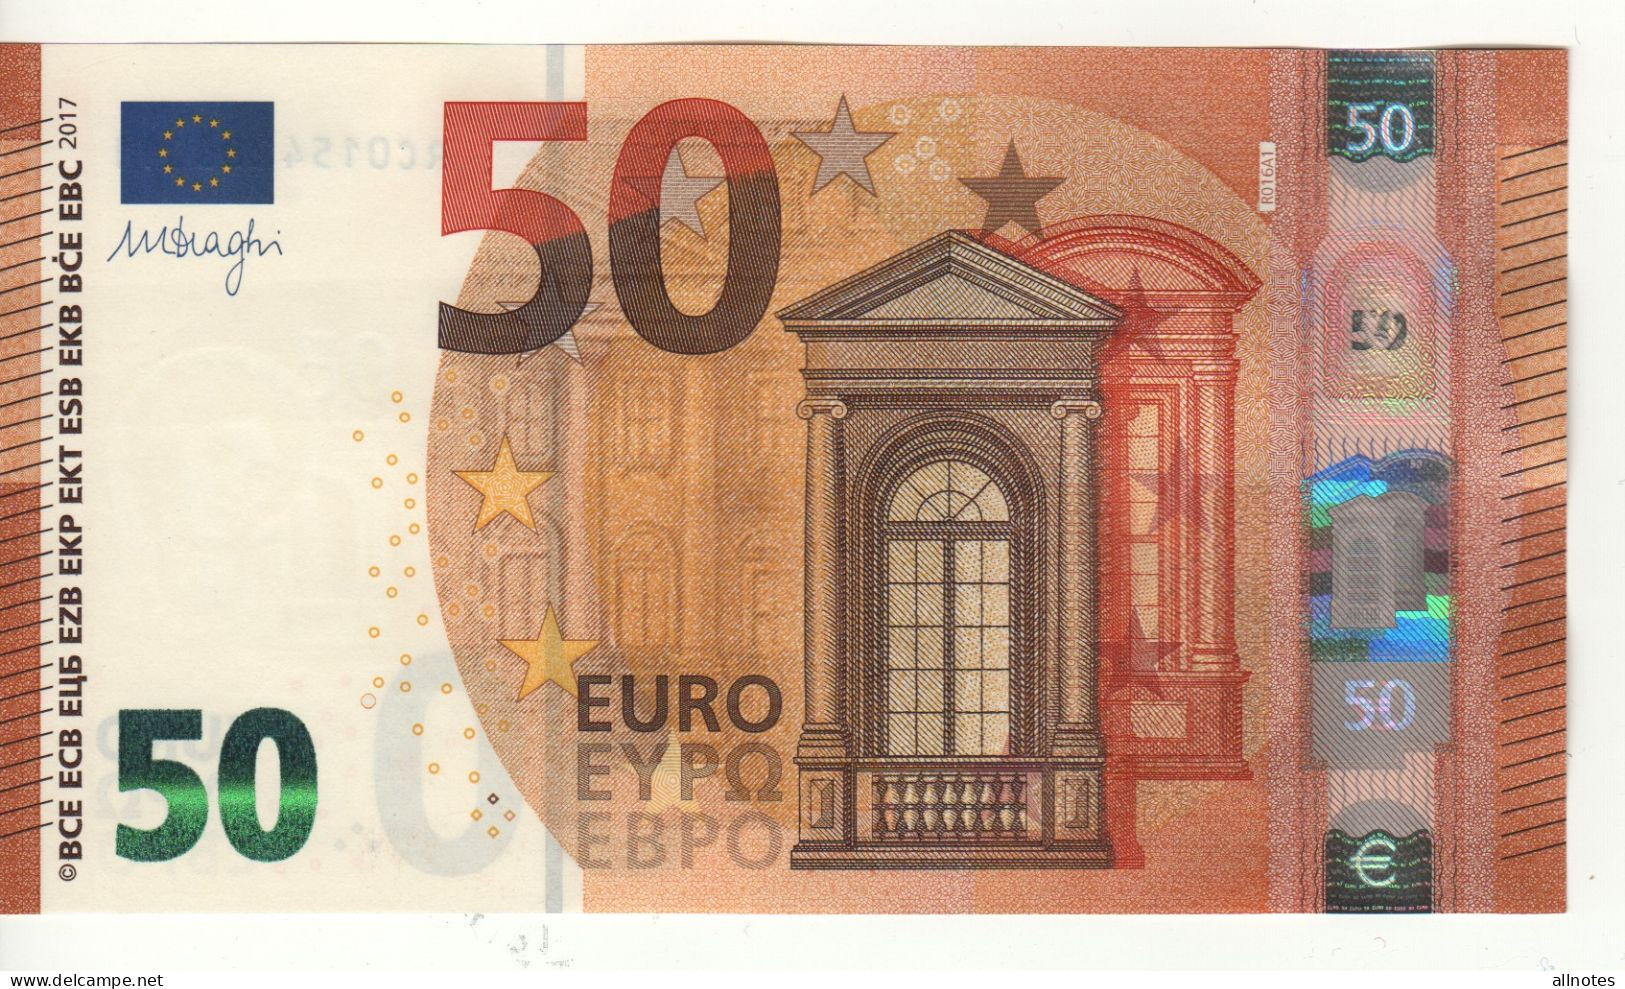 50 EURO  "Germany”   DRAGHI   R 016 A1  RC0110800039. /  FDS - UNC - 50 Euro